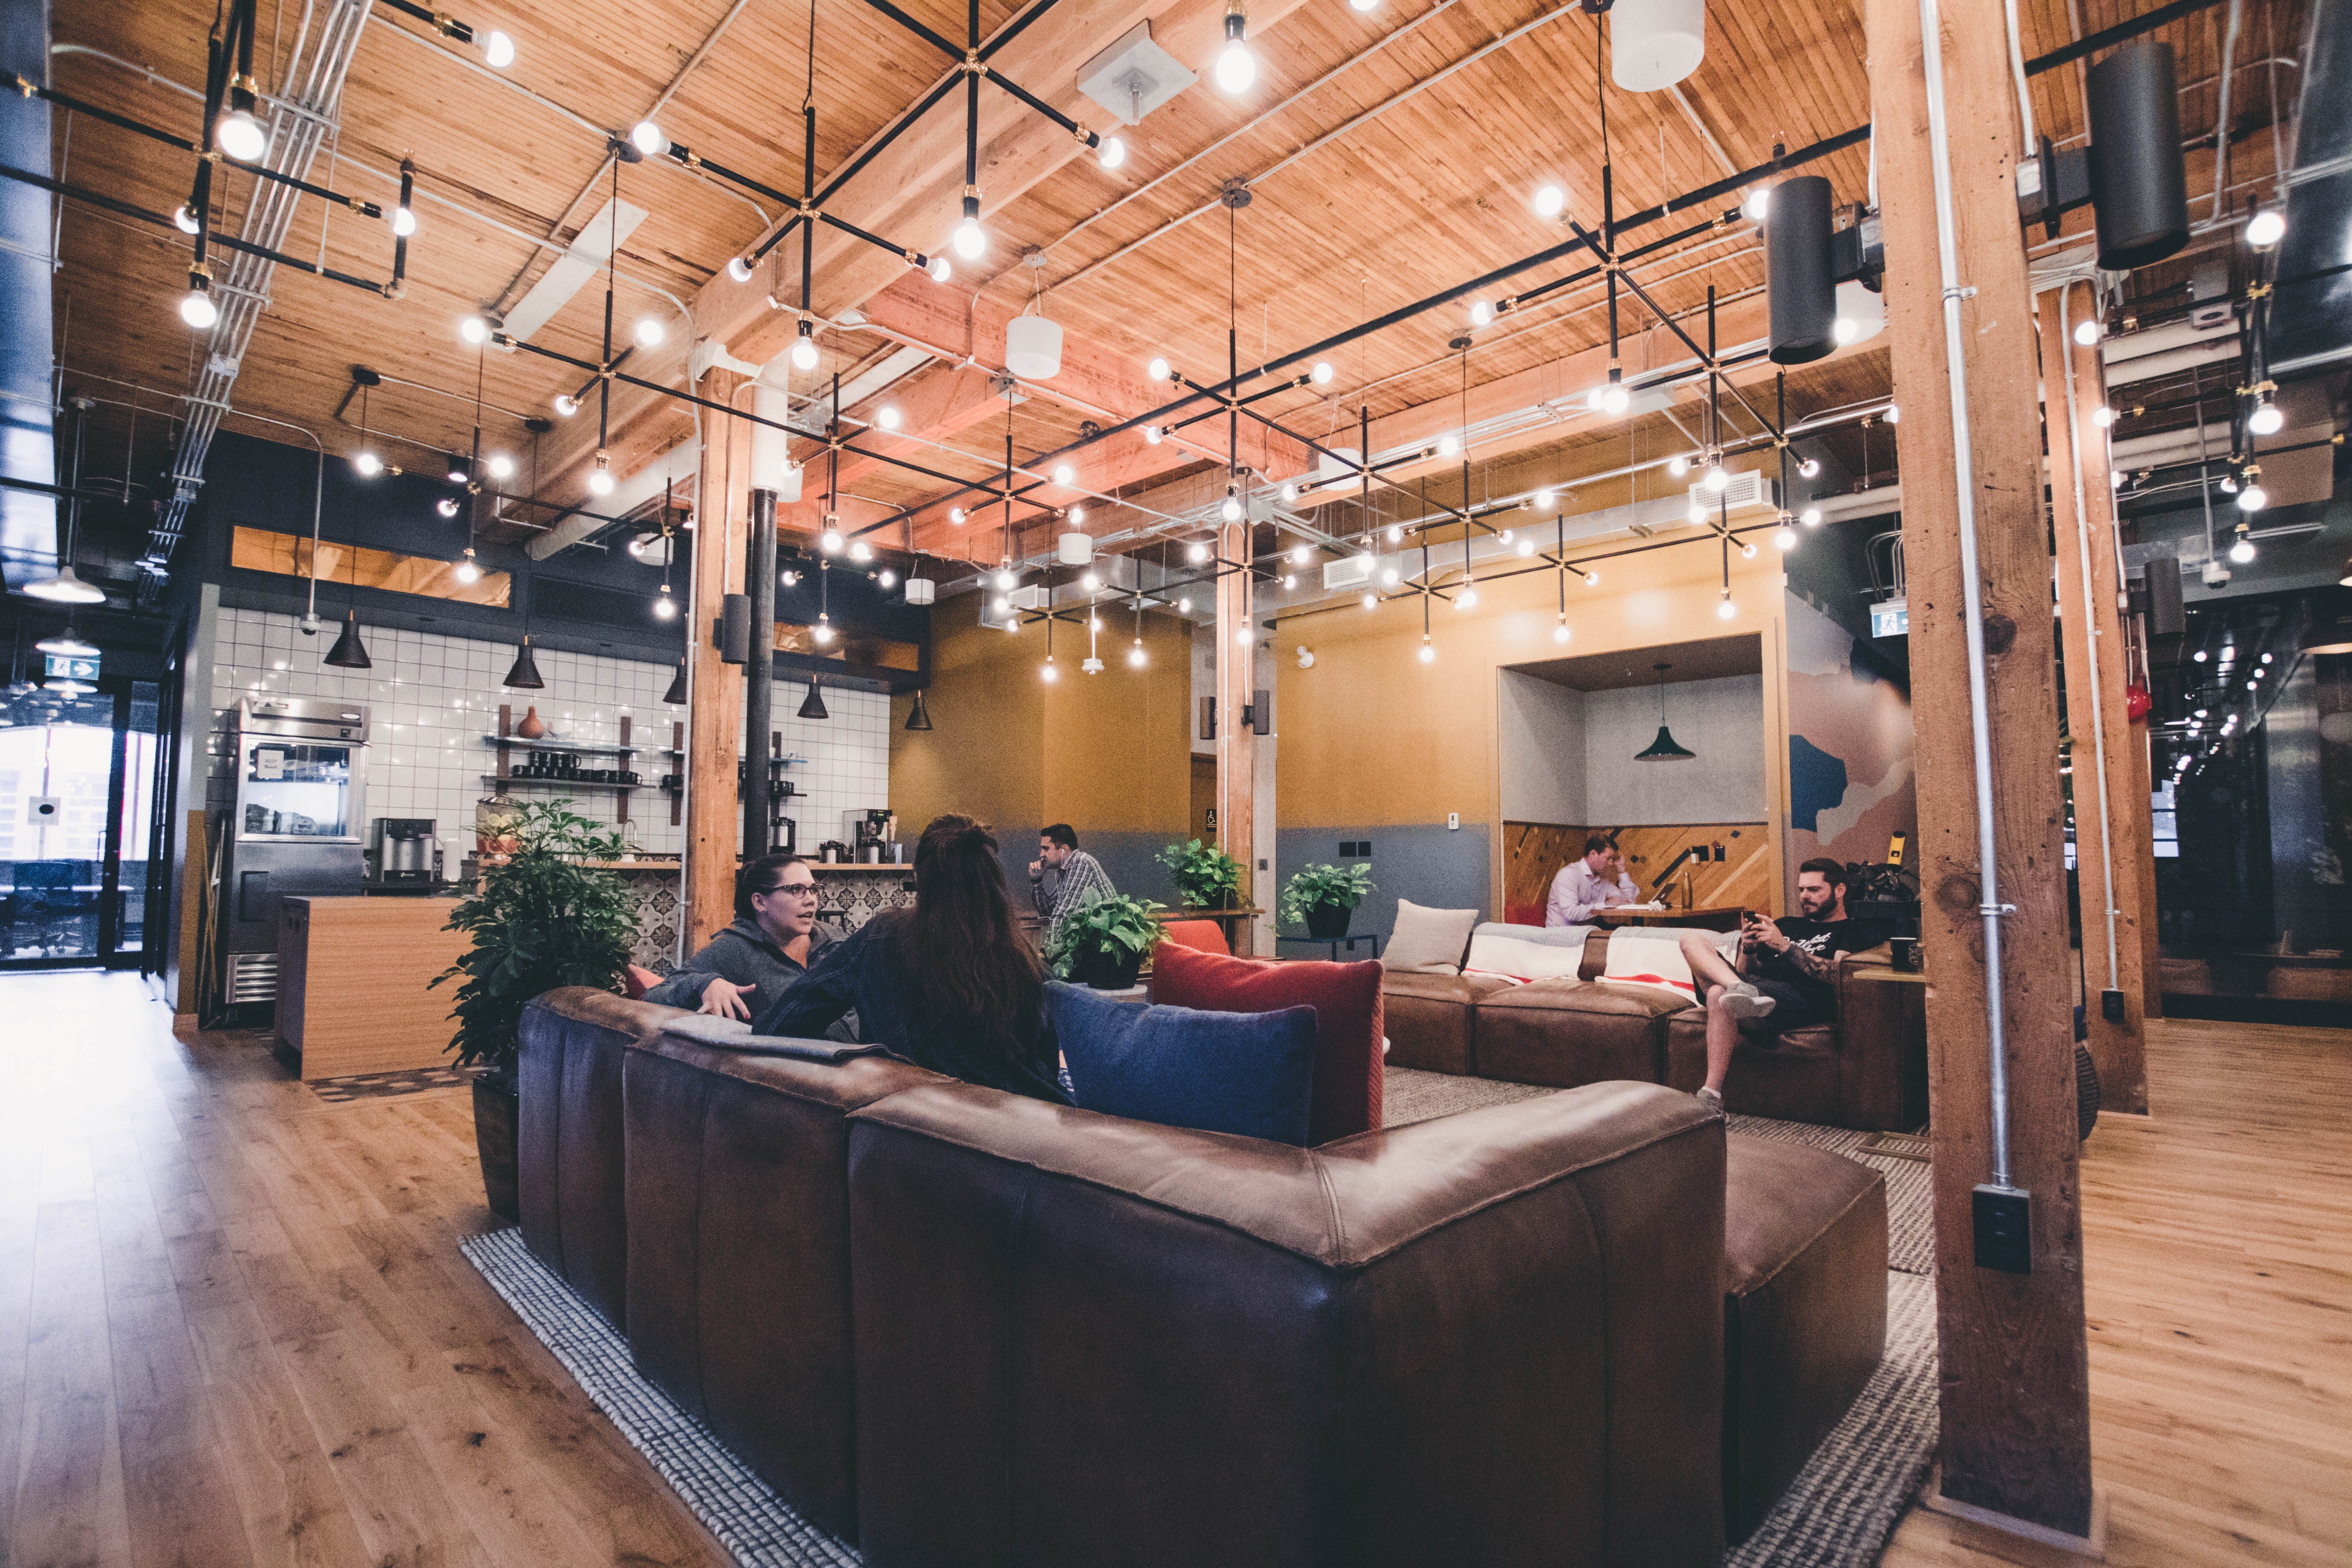 What You Need to Know About Coworking Space - WeWork vs. Make Offices